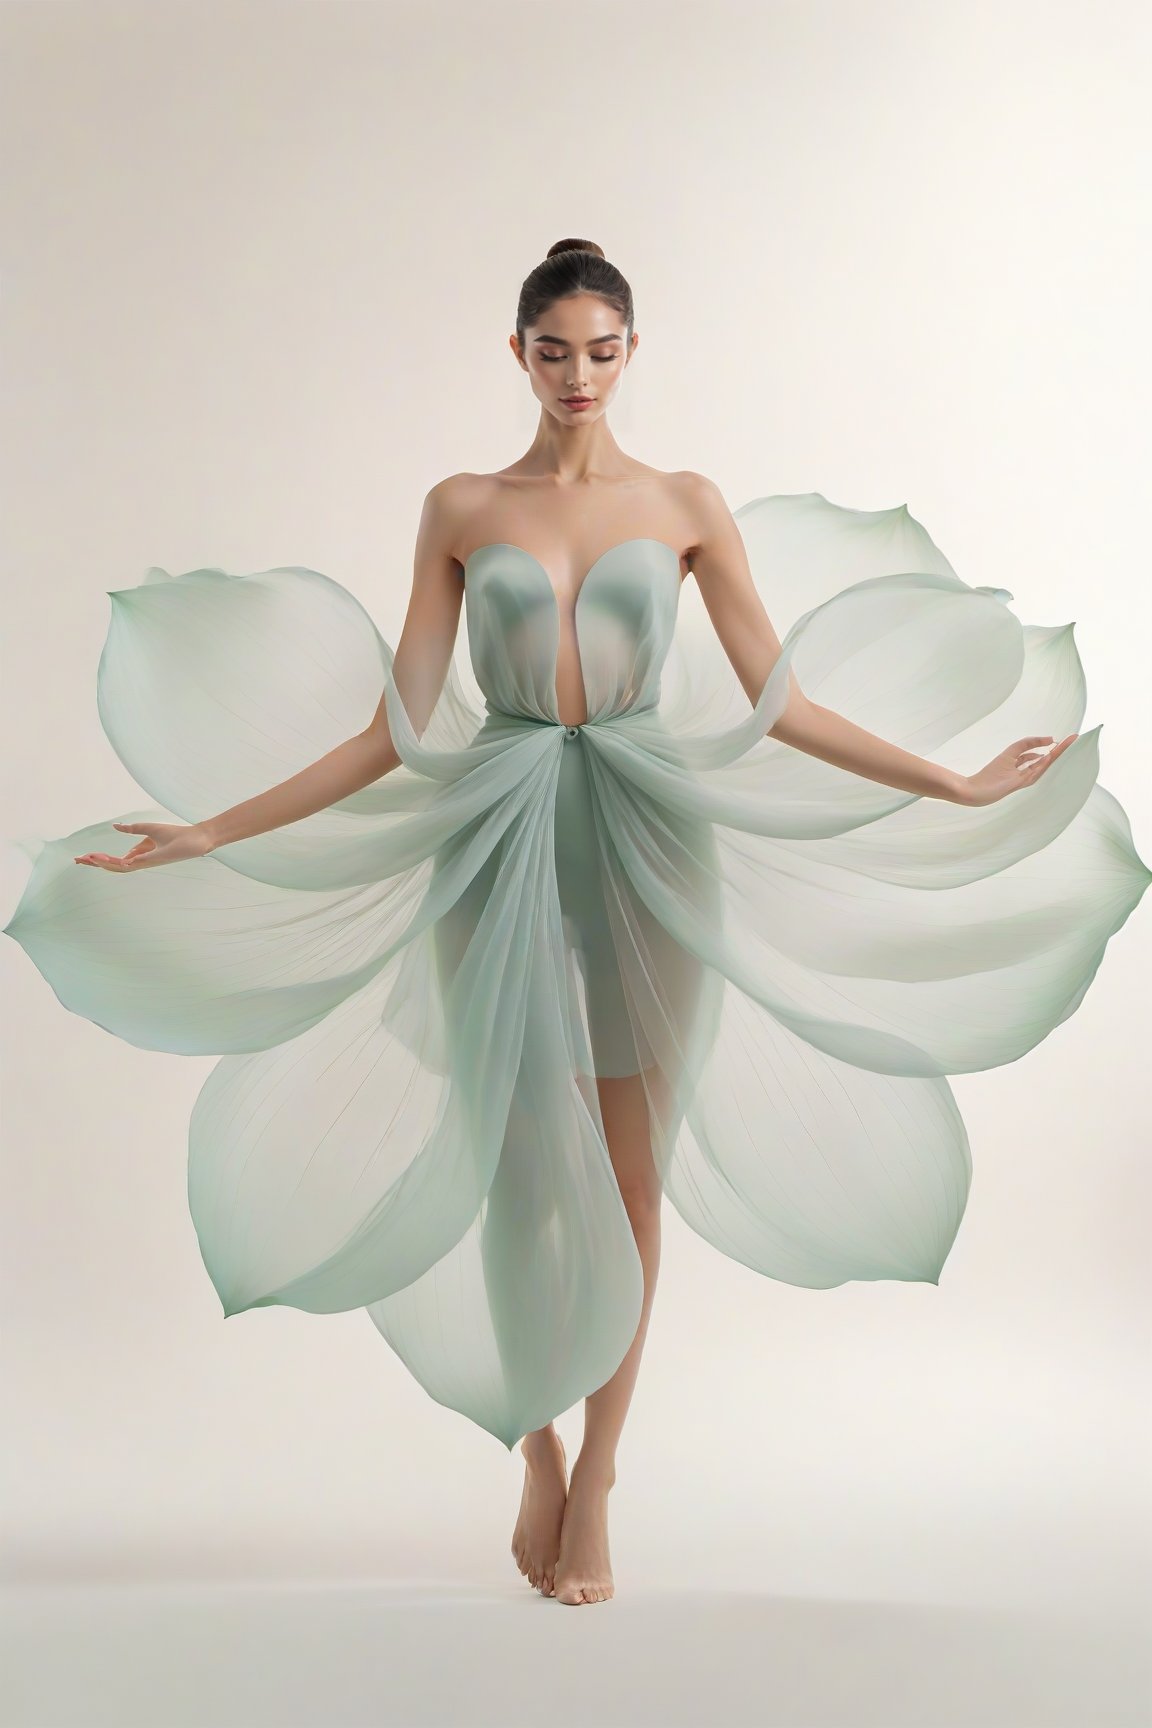 full body, Light jade tone,simple white background, lighting effect, minimalist, elegant, pure gentle, soft light, photorealistic. a women (collarbone, shoulders) dynamic pose, The hyper-giant lotus with huge and long petals (petal made of a thin and soft tulle fabric, flowy petals fully background, floating petals, hyper-flying petals, smoke effect mix with petal), lotus dress.,Lotus Dress